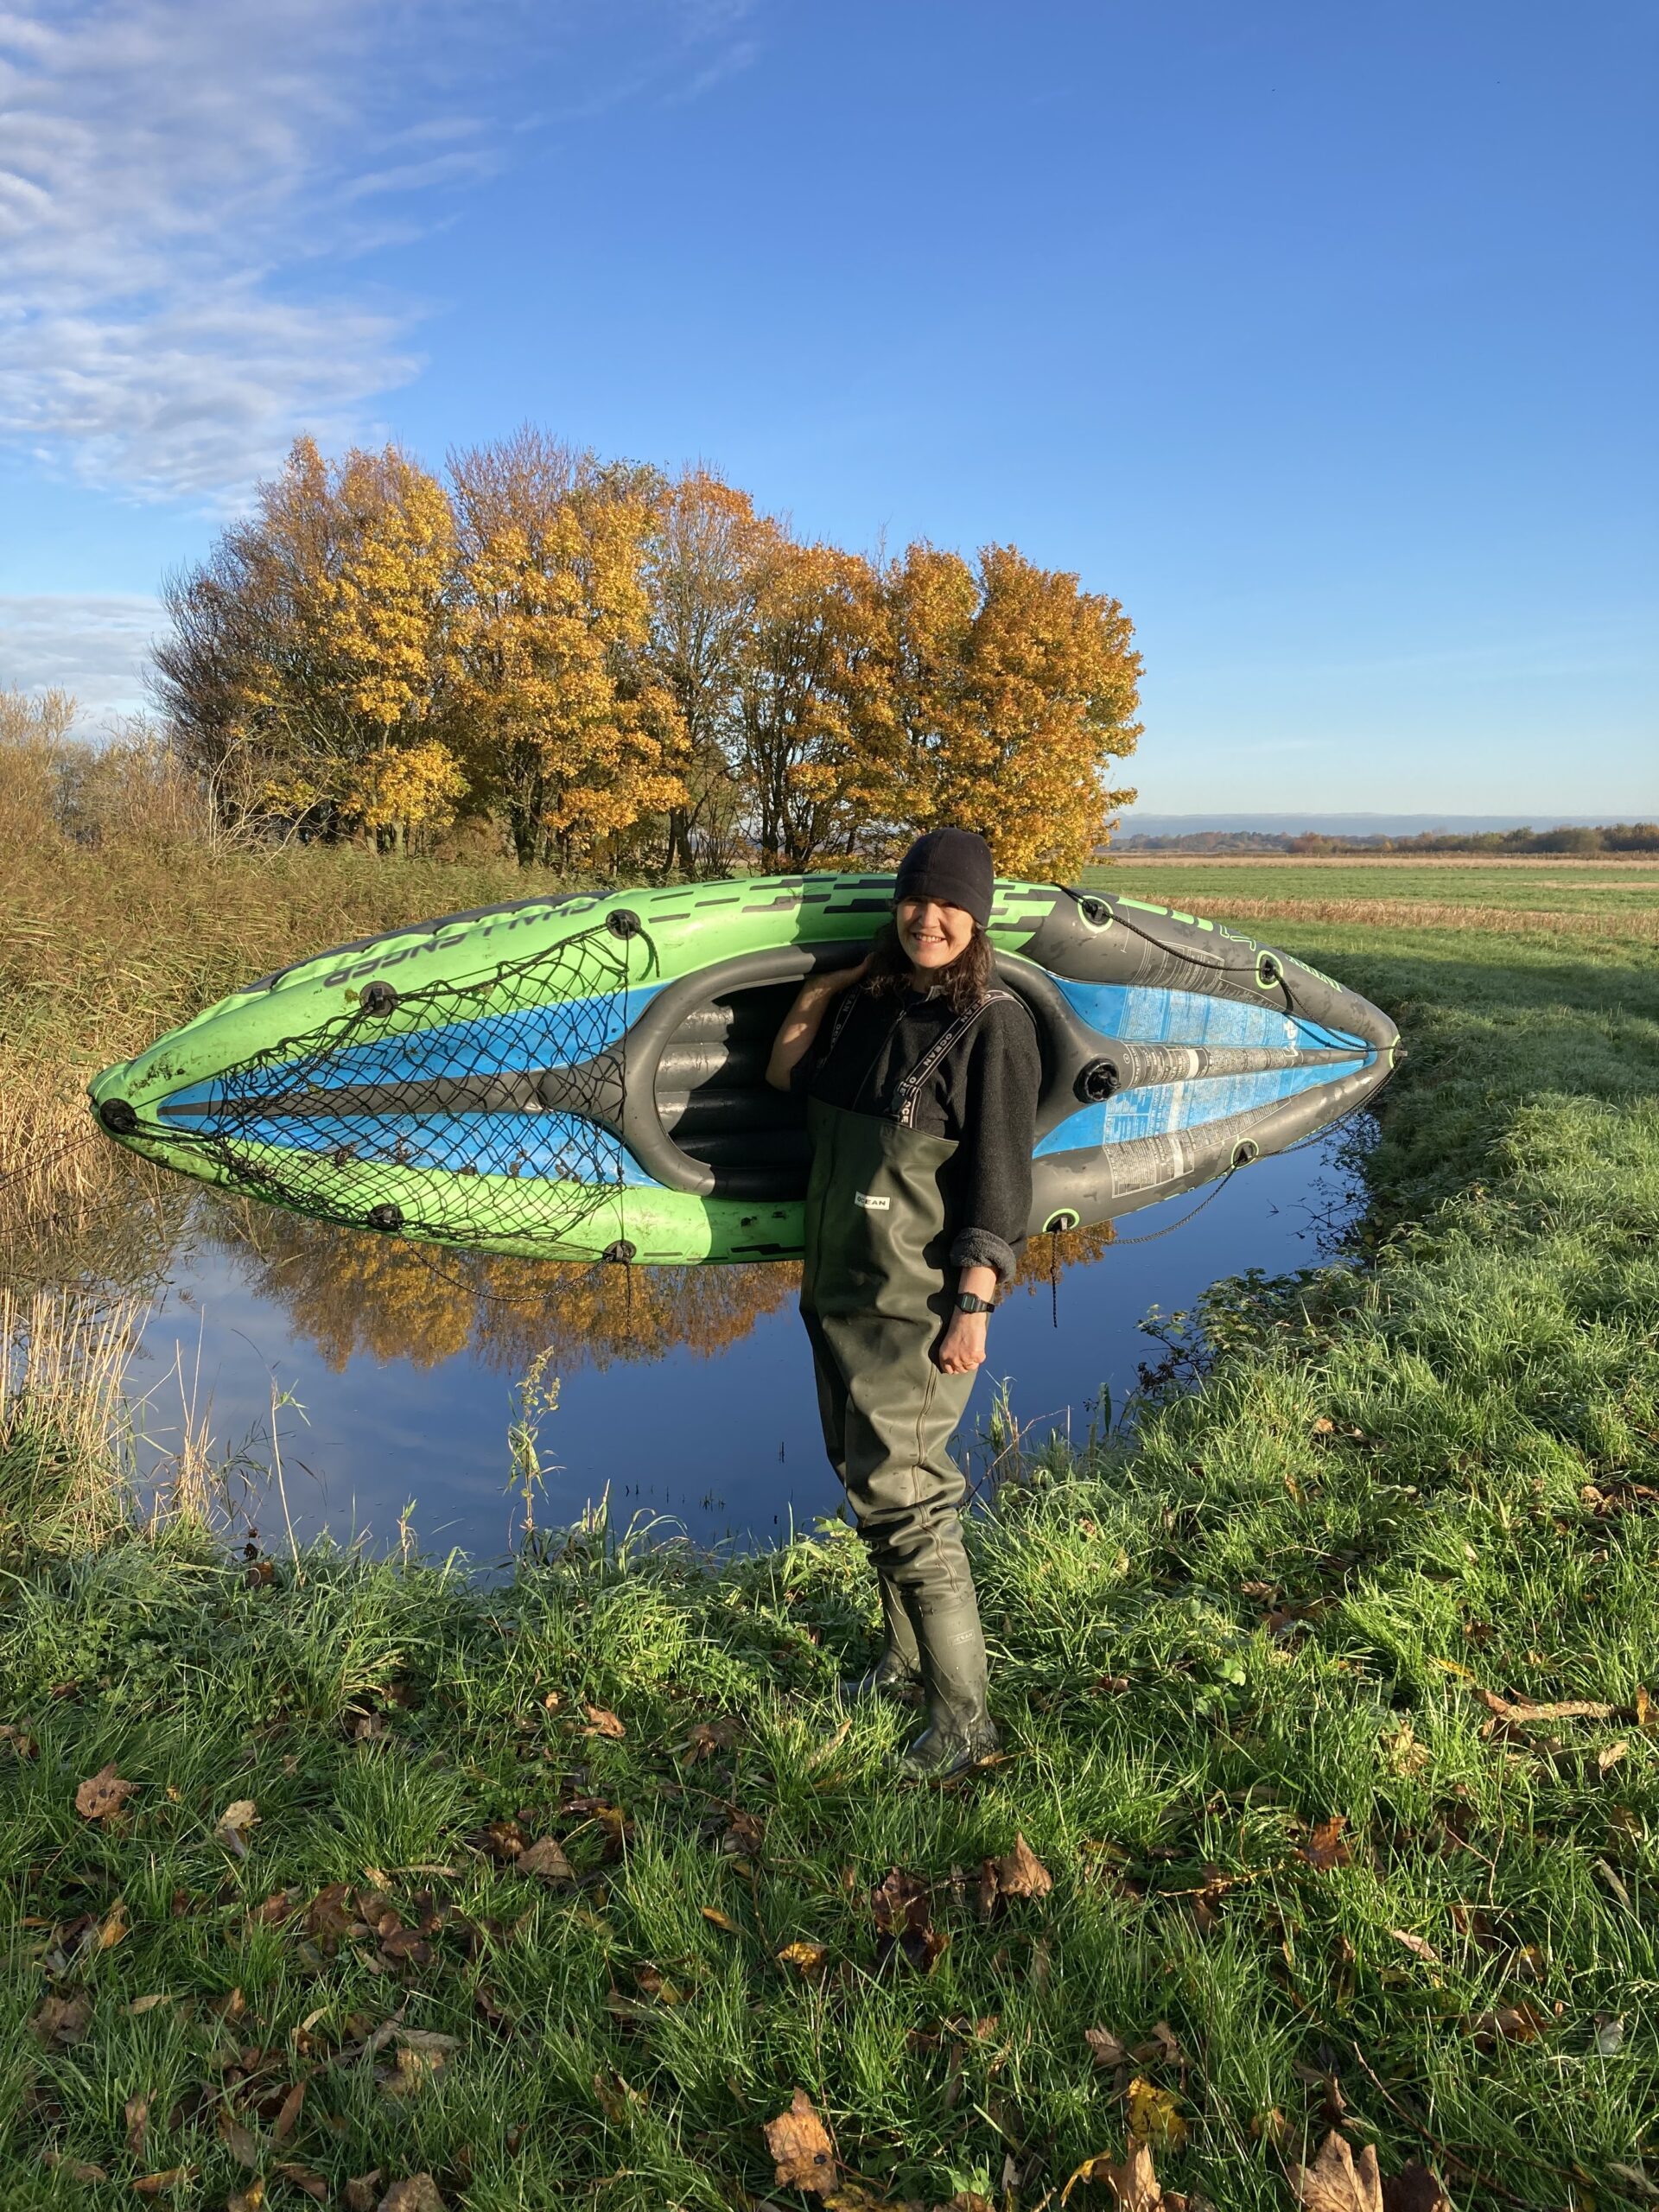 Penny Williams carrying an inflatable kayak by a pond on a sunny day with blue skies.